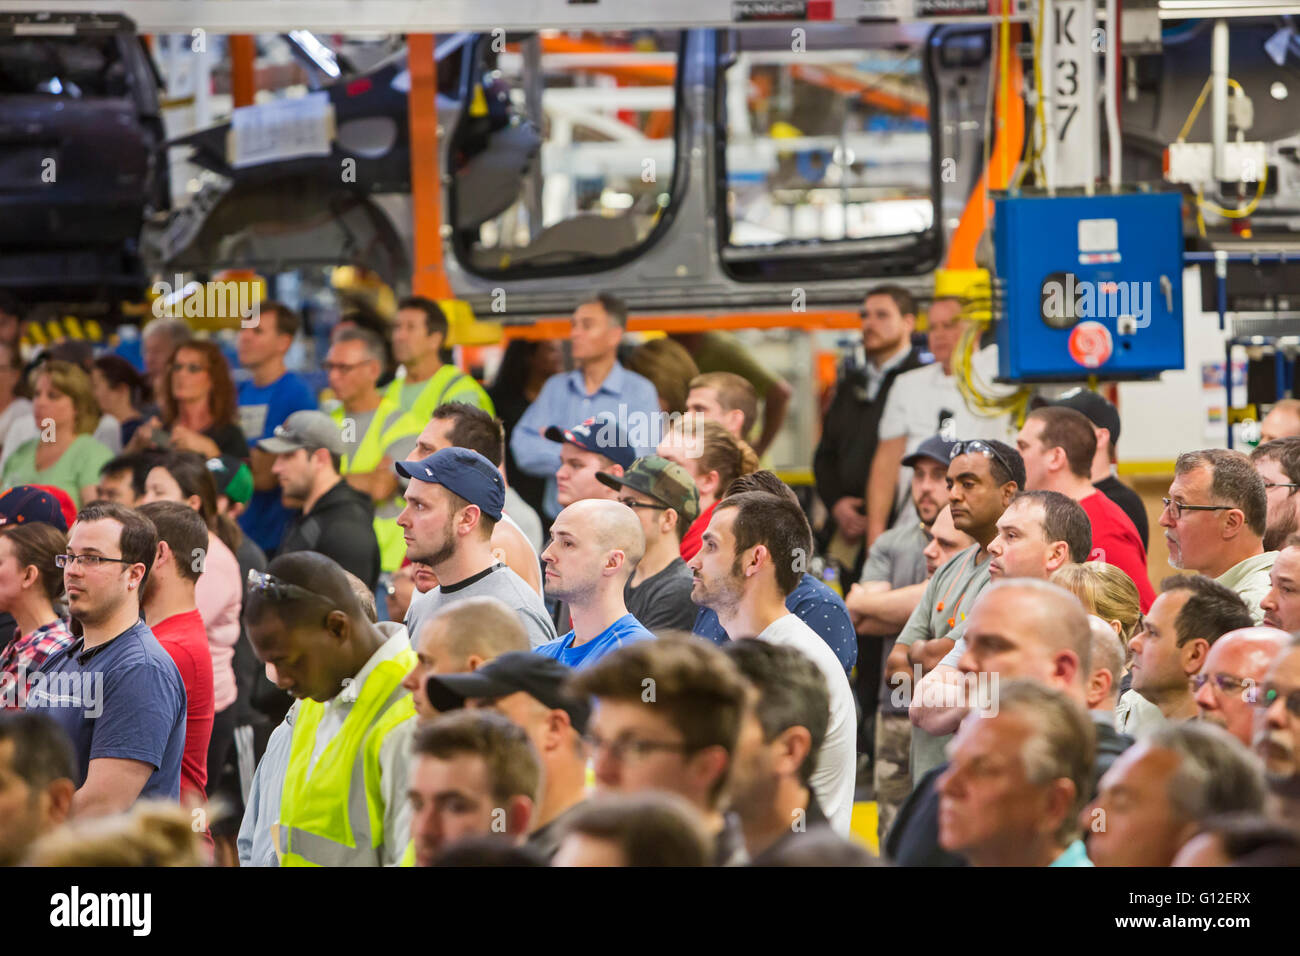 Windsor, Ontario Canada - Workers at Fiat Chrysler Automobiles' Windsor Assembly Plant. Stock Photo